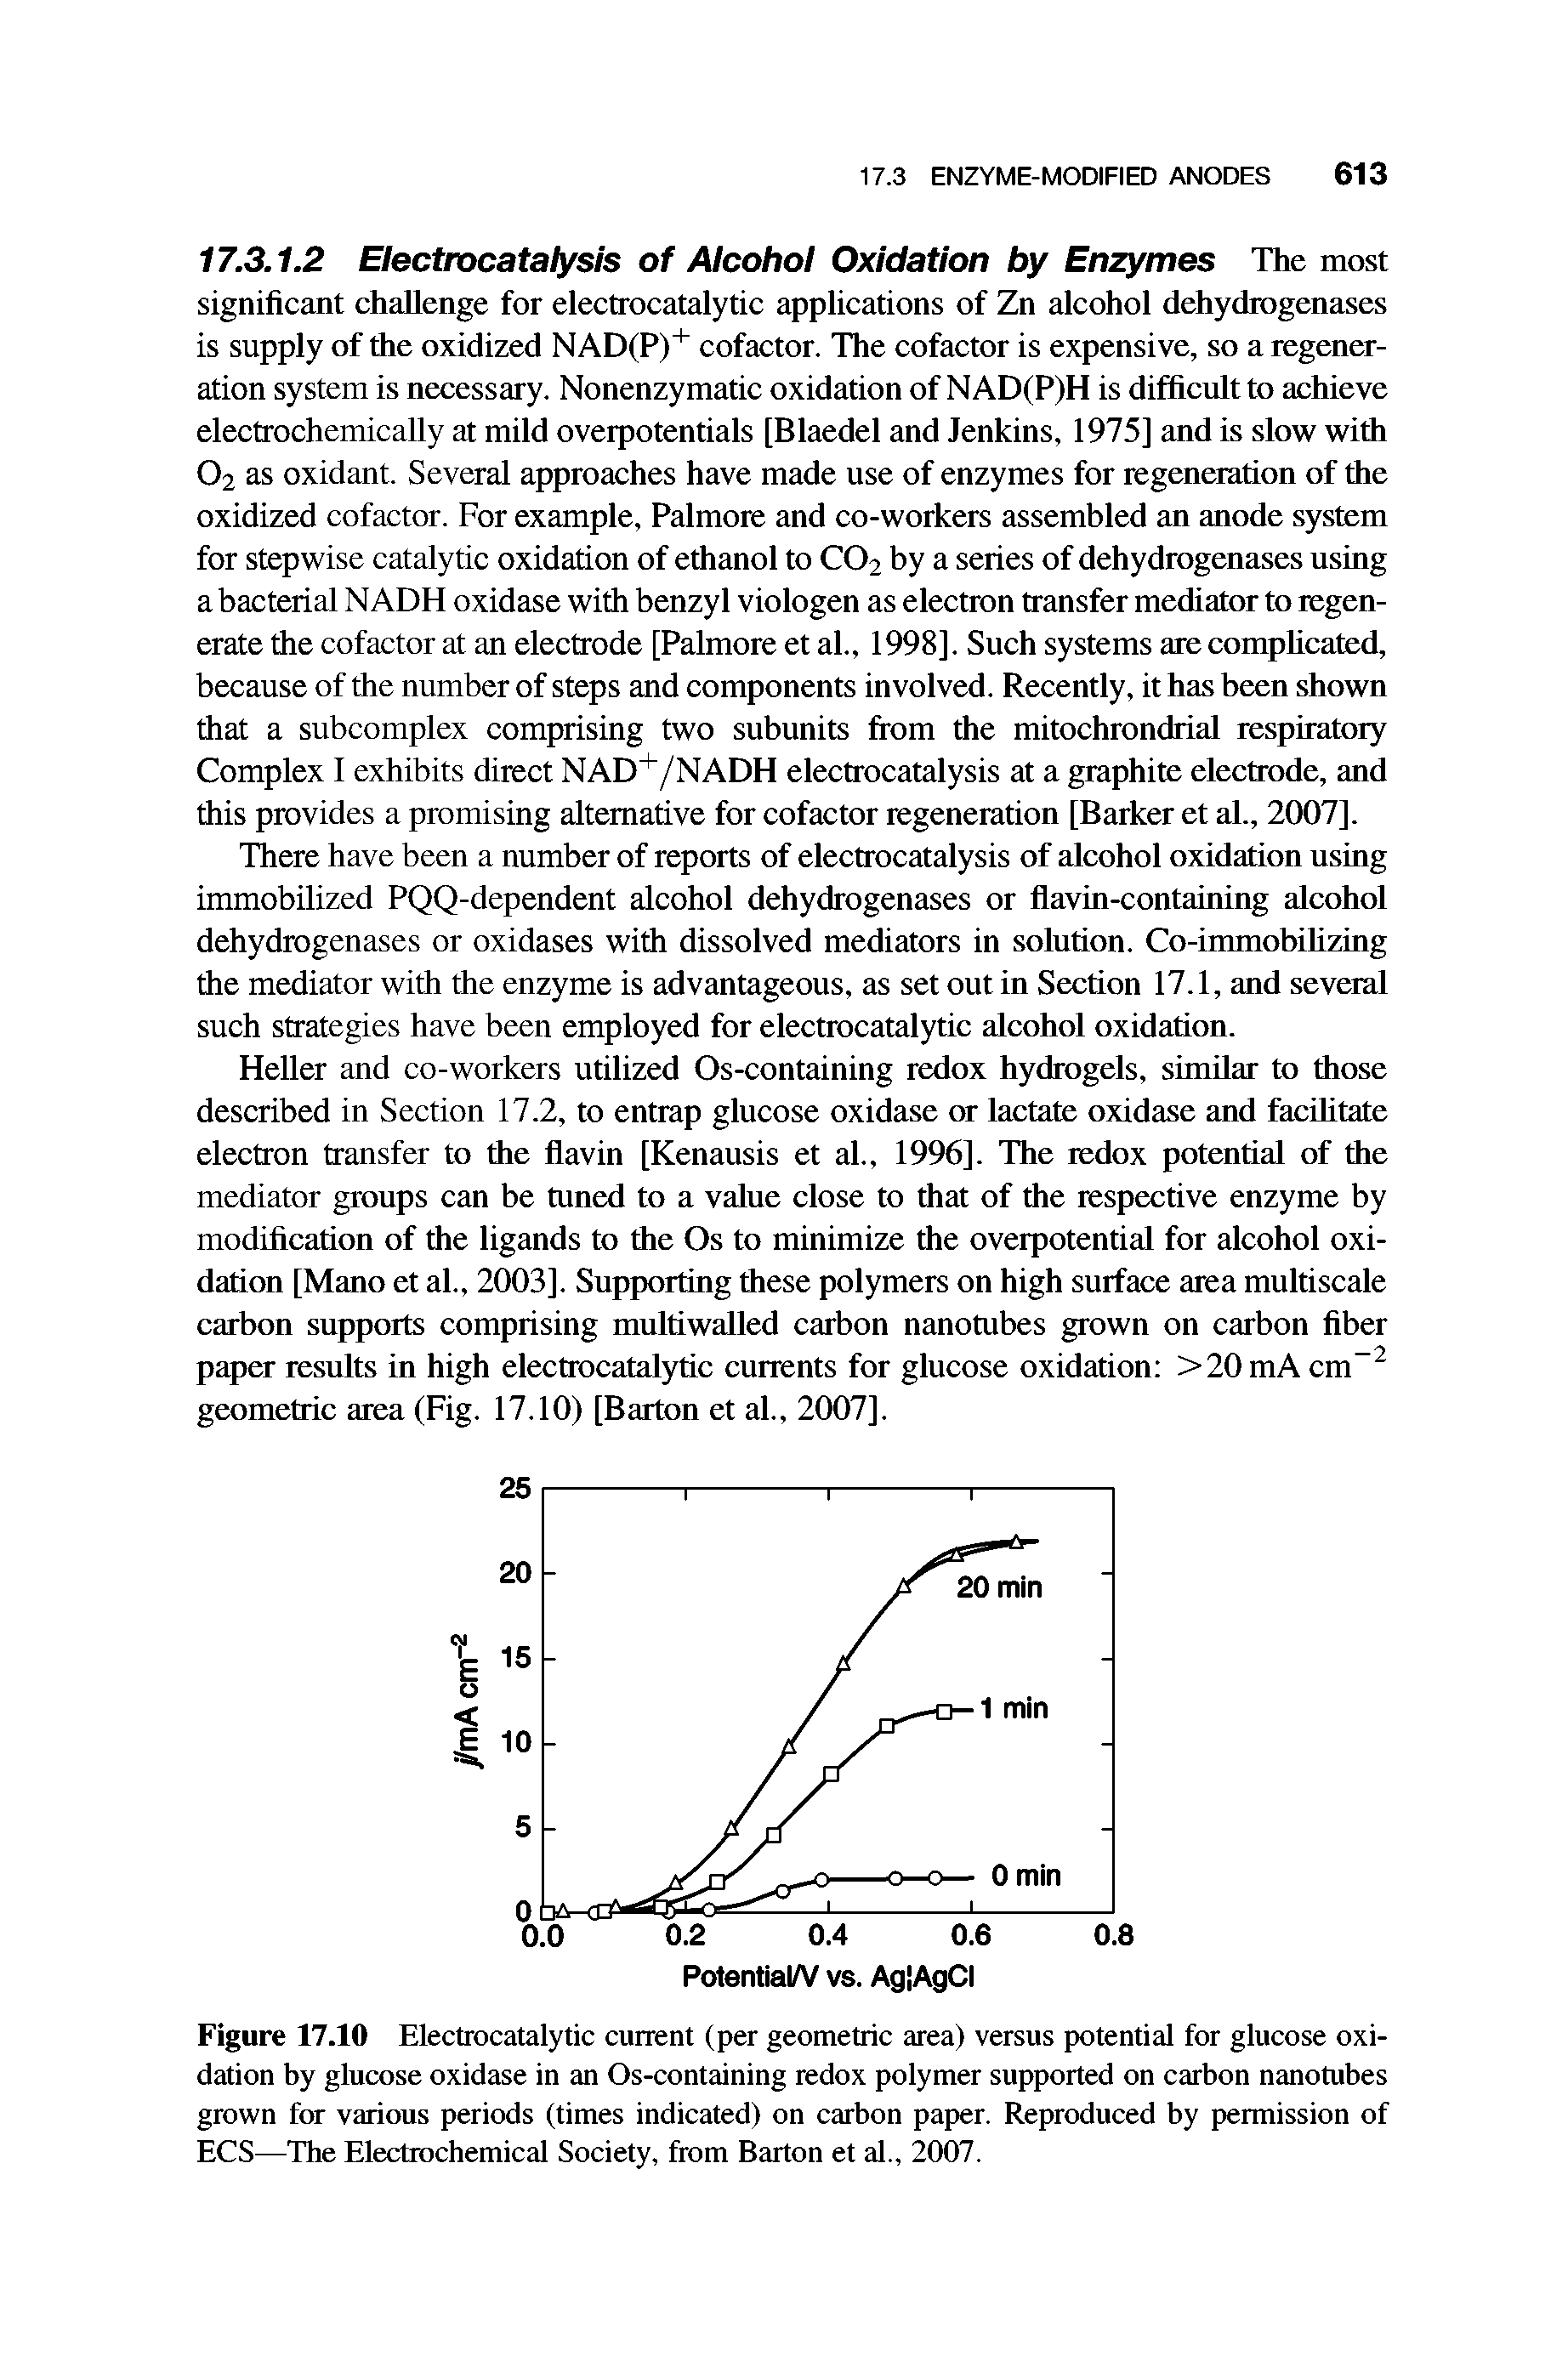 Figure 17.10 Electrocatalytic current (per geometric area) versus potential for glucose oxidation by glucose oxidase in an Os-containing redox polymer supported on carbon nanotubes grown for various periods (times indicated) on carbon paper. Reproduced by permission of ECS—The Electrochemical Society, from Barton et al., 2007.